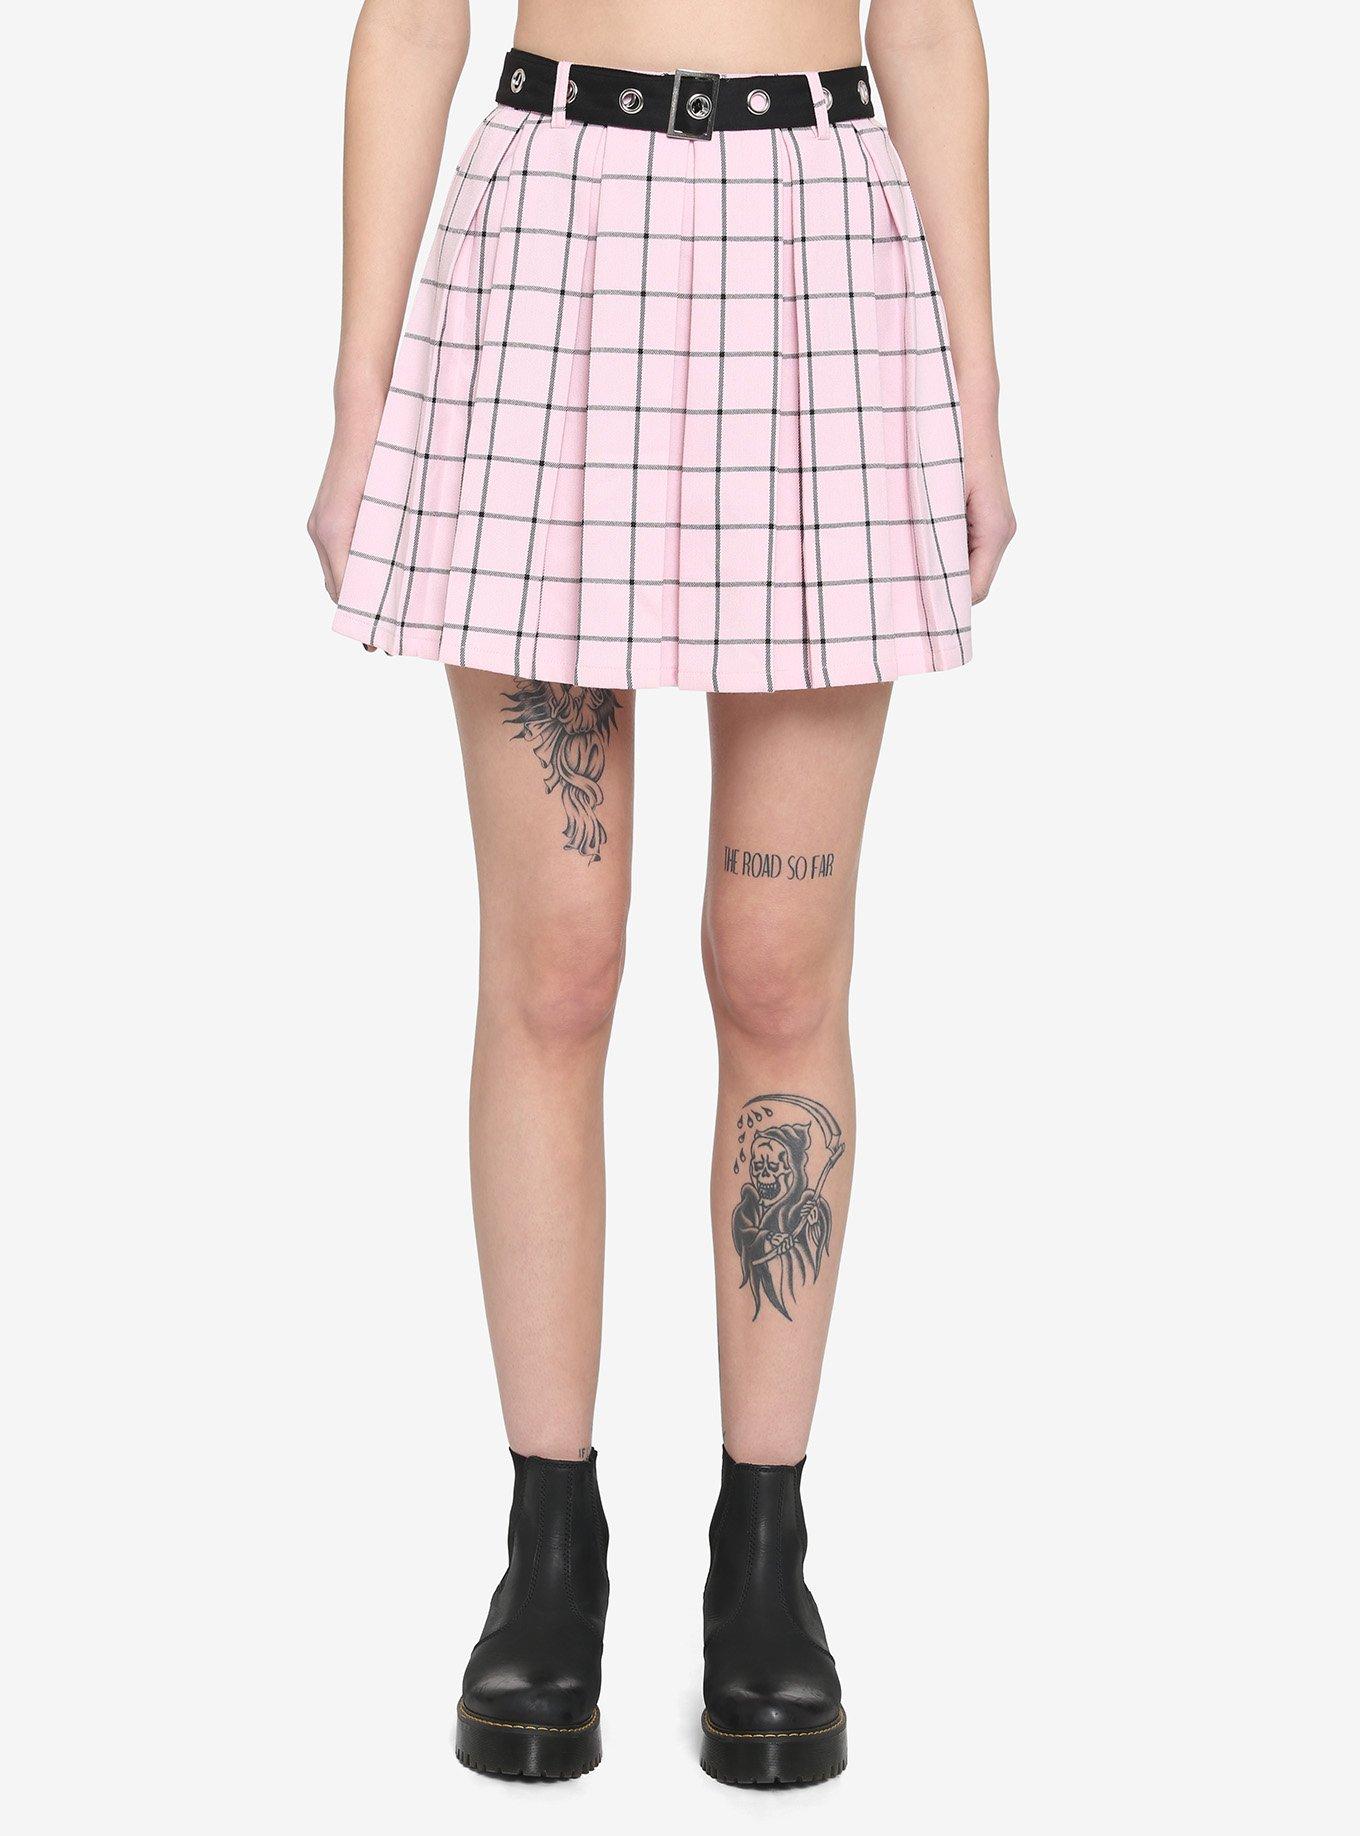 Pink & Black Grid Pleated Skirt With Grommet Belt | Hot Topic